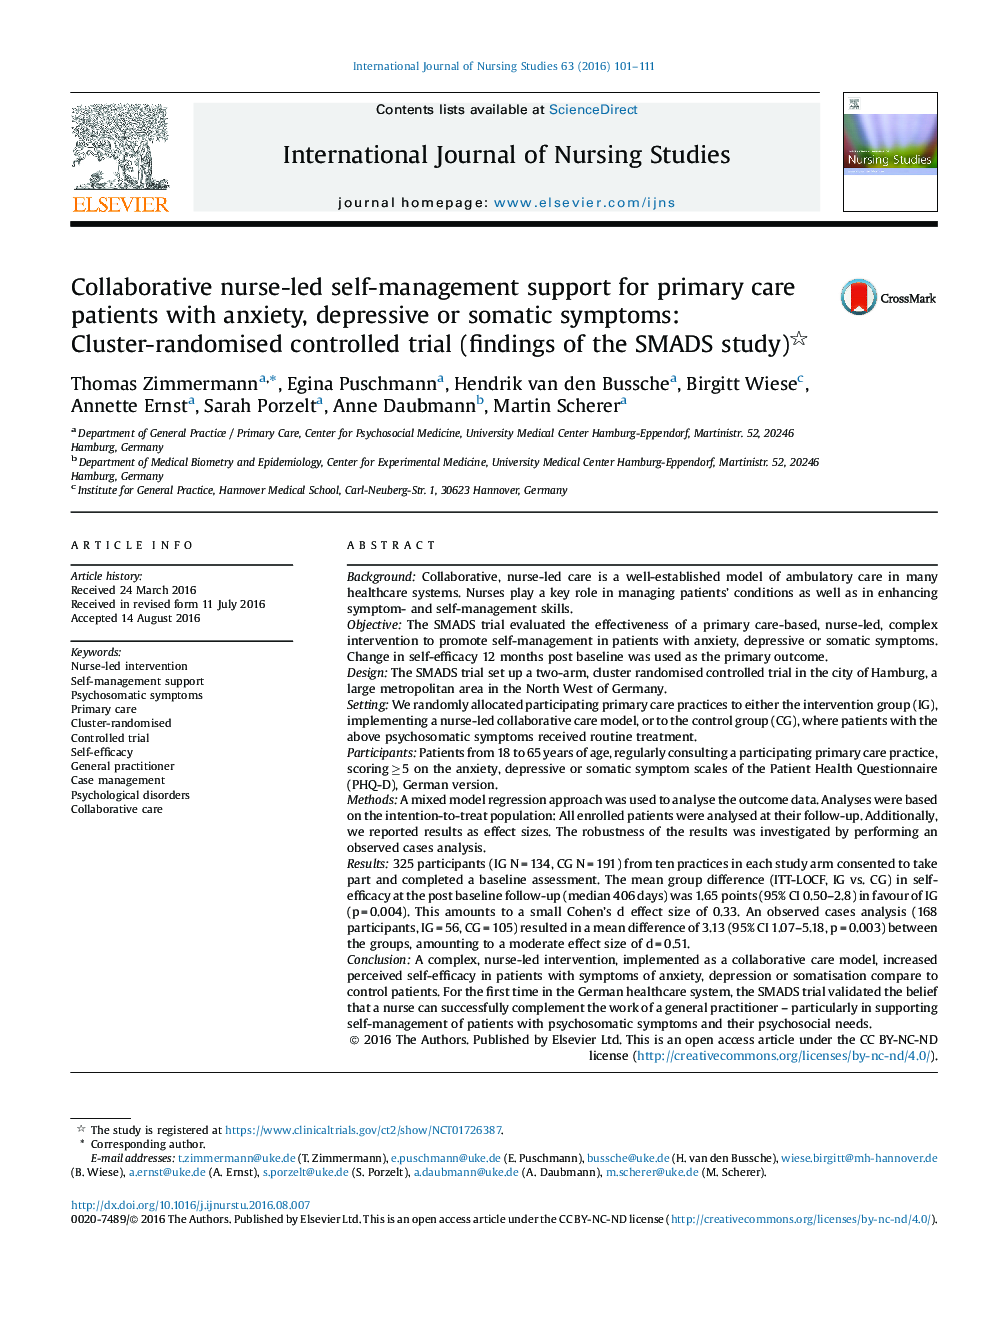 Collaborative nurse-led self-management support for primary care patients with anxiety, depressive or somatic symptoms: Cluster-randomised controlled trial (findings of the SMADS study)